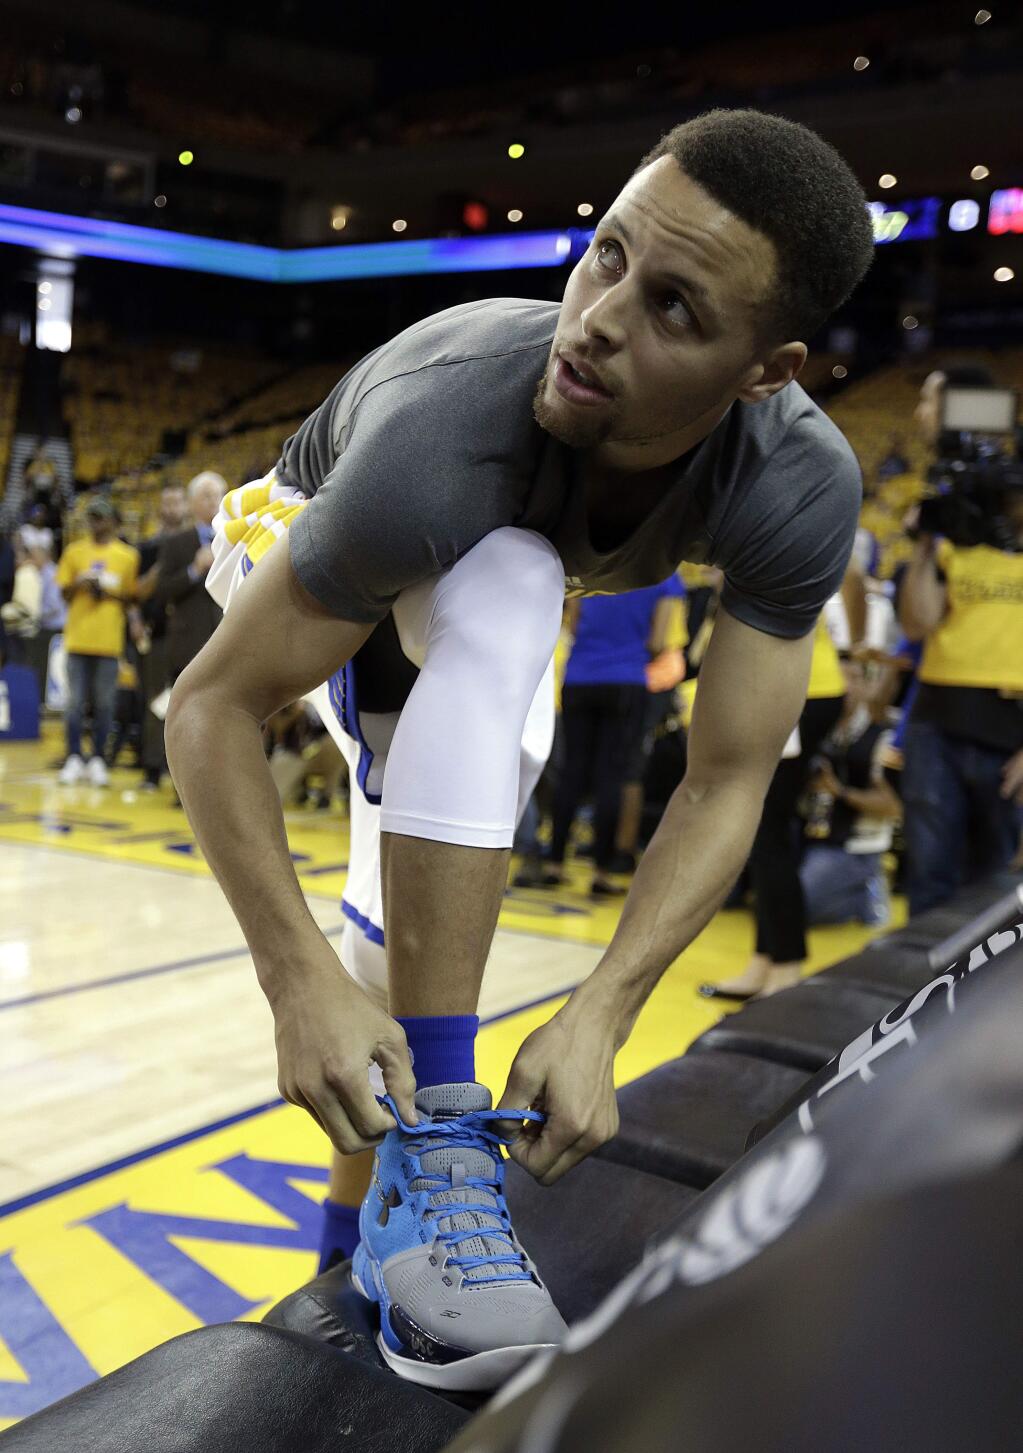 Golden State Warriors' Stephen Curry laces up his right shoe during a warm up prior to Game 2 of a first-round NBA basketball playoff series against the Houston Rockets on Monday, April 18, 2016, in Oakland, Calif. (AP Photo/Ben Margot)